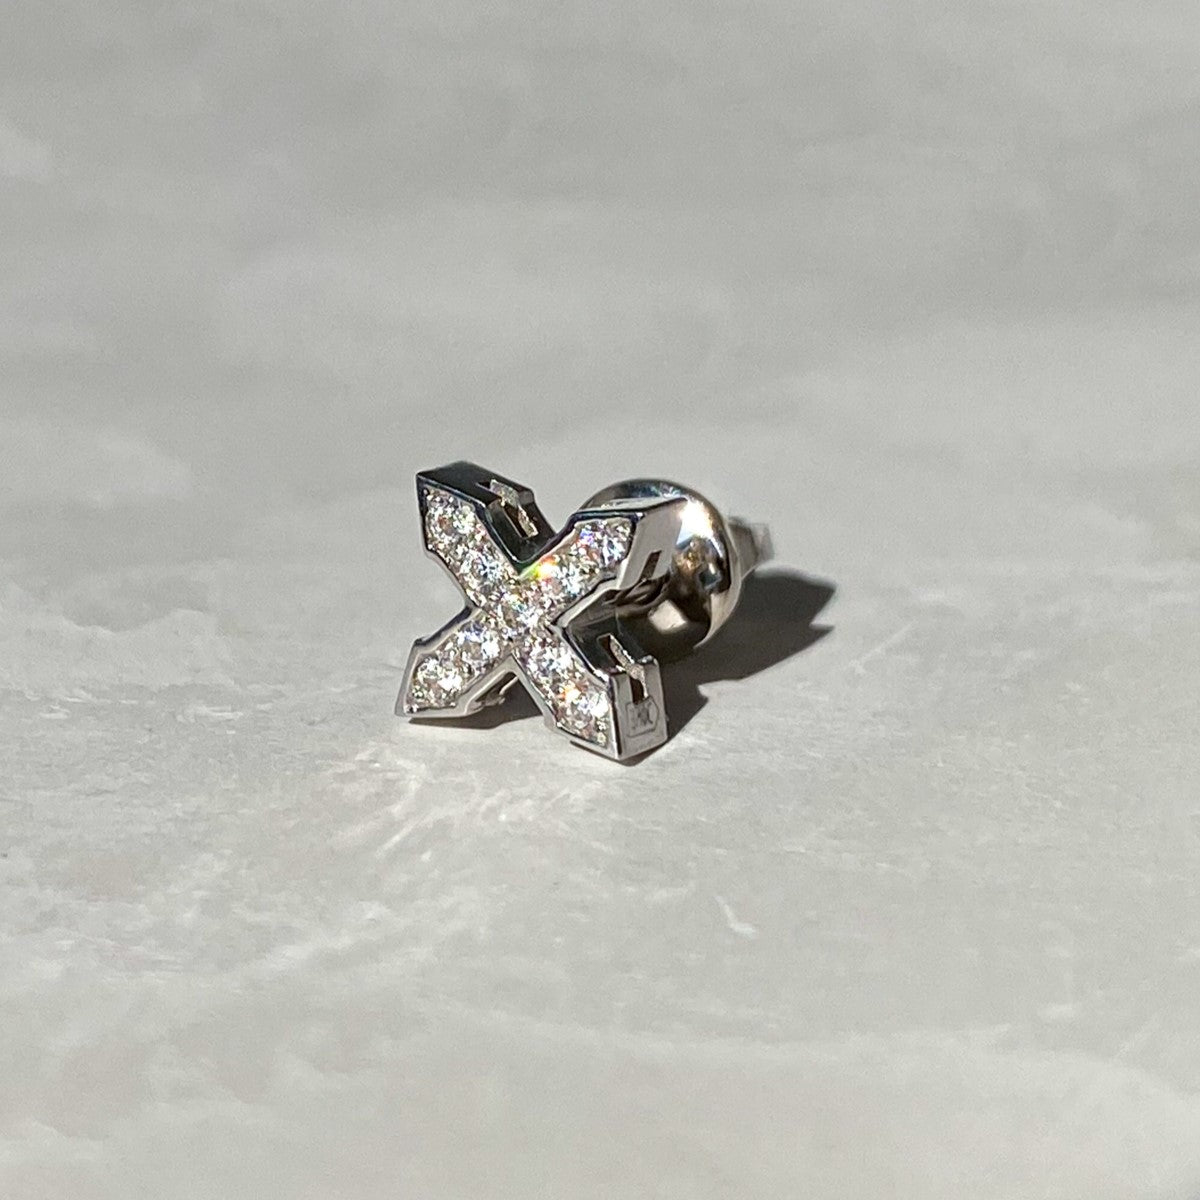 STUD MINI STAR "GLOW" WITH MOISSANITE / SILVER